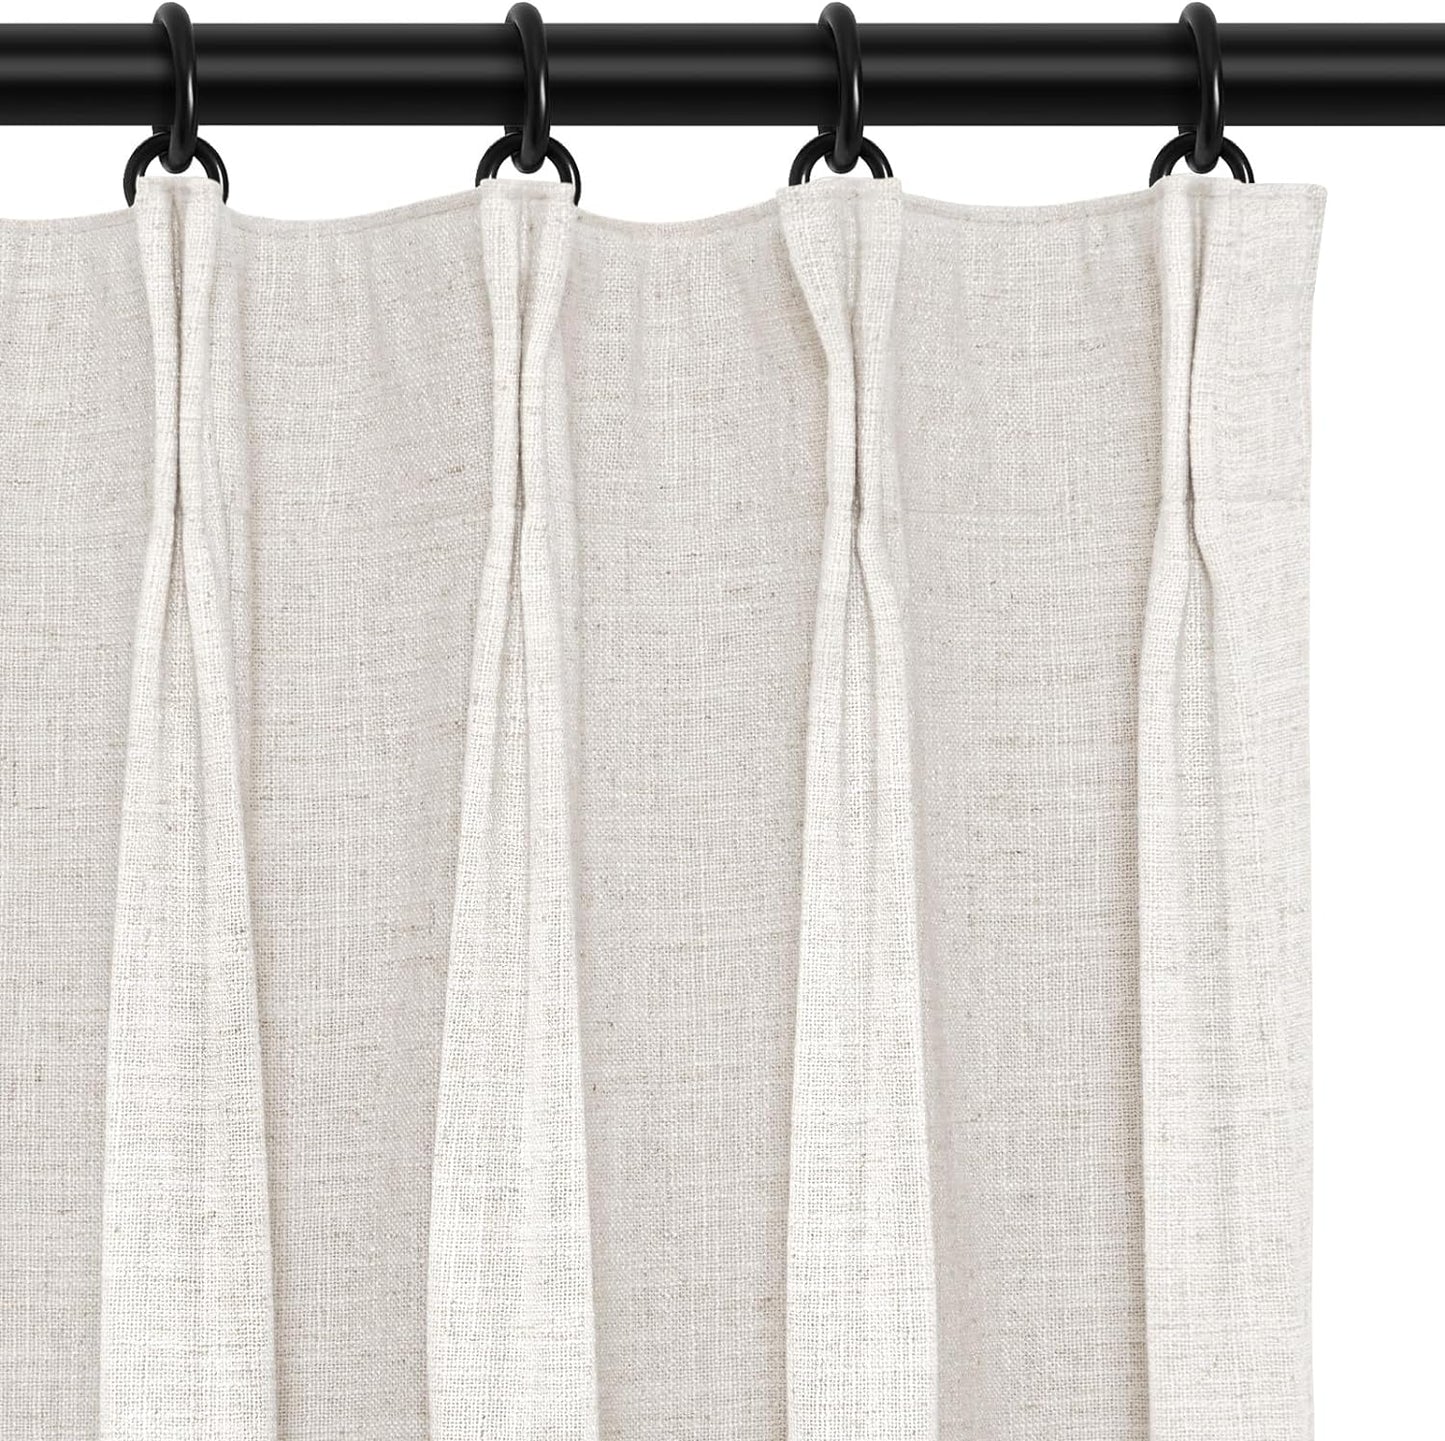 INOVADAY 100% Blackout Curtains for Bedroom, Pinch Pleated Linen Blackout Curtains 96 Inch Length 2 Panels Set, Thermal Room Darkening Linen Curtain Drapes for Living Room, W40 X L96,Beige White  INOVADAY Linen 40"W X 84"L-2 Panels 